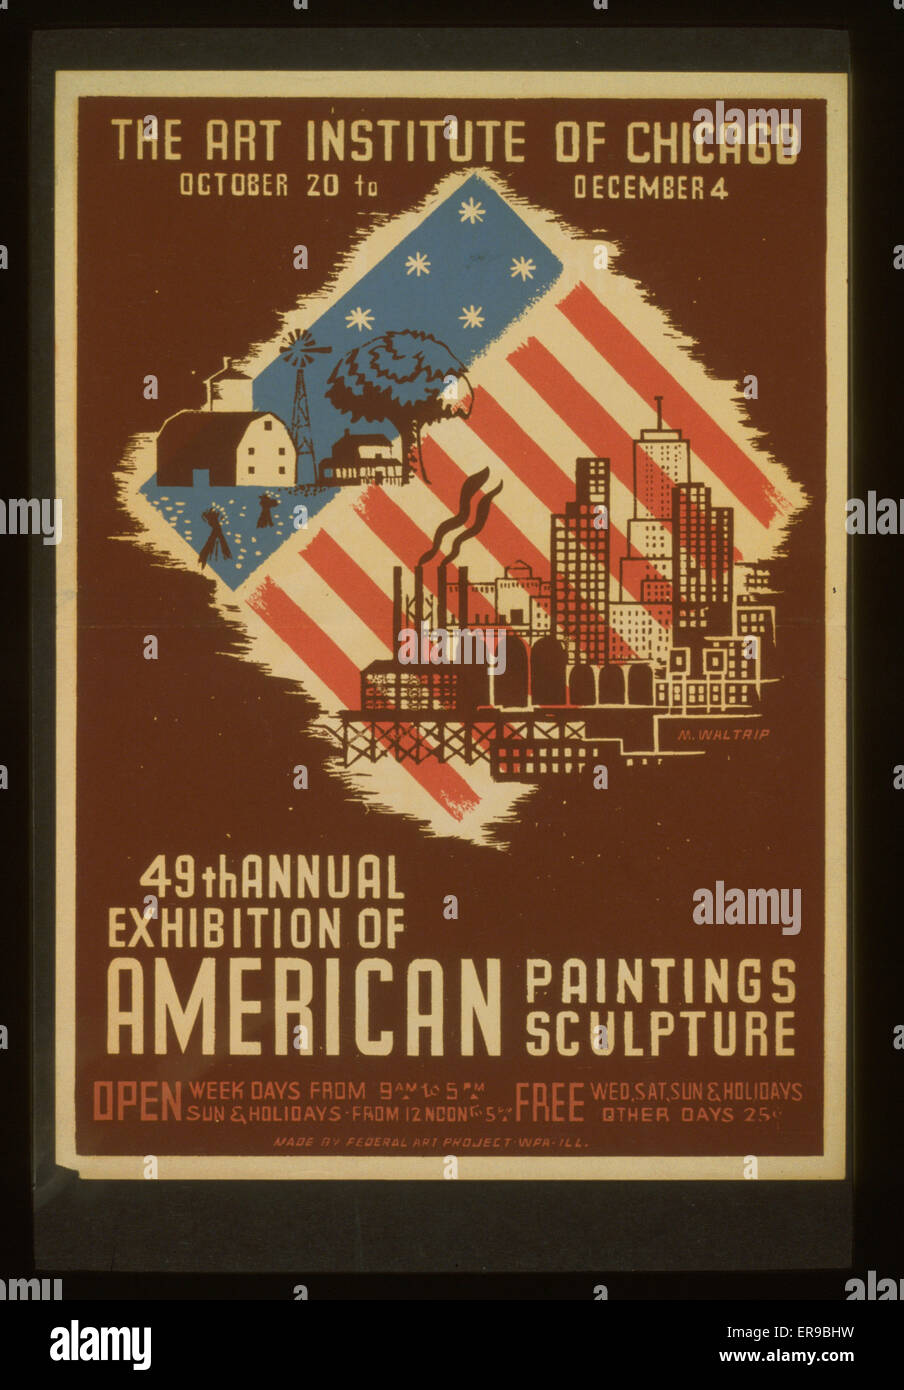 49th annual exhibition of American paintings sculpture. Poster for art exhibition to be held at the Art Institute of Chicago, October 20 to December 4, showing images of a city skyline and a farm superimposed over an American flag. Date between 1936 and 1 Stock Photo